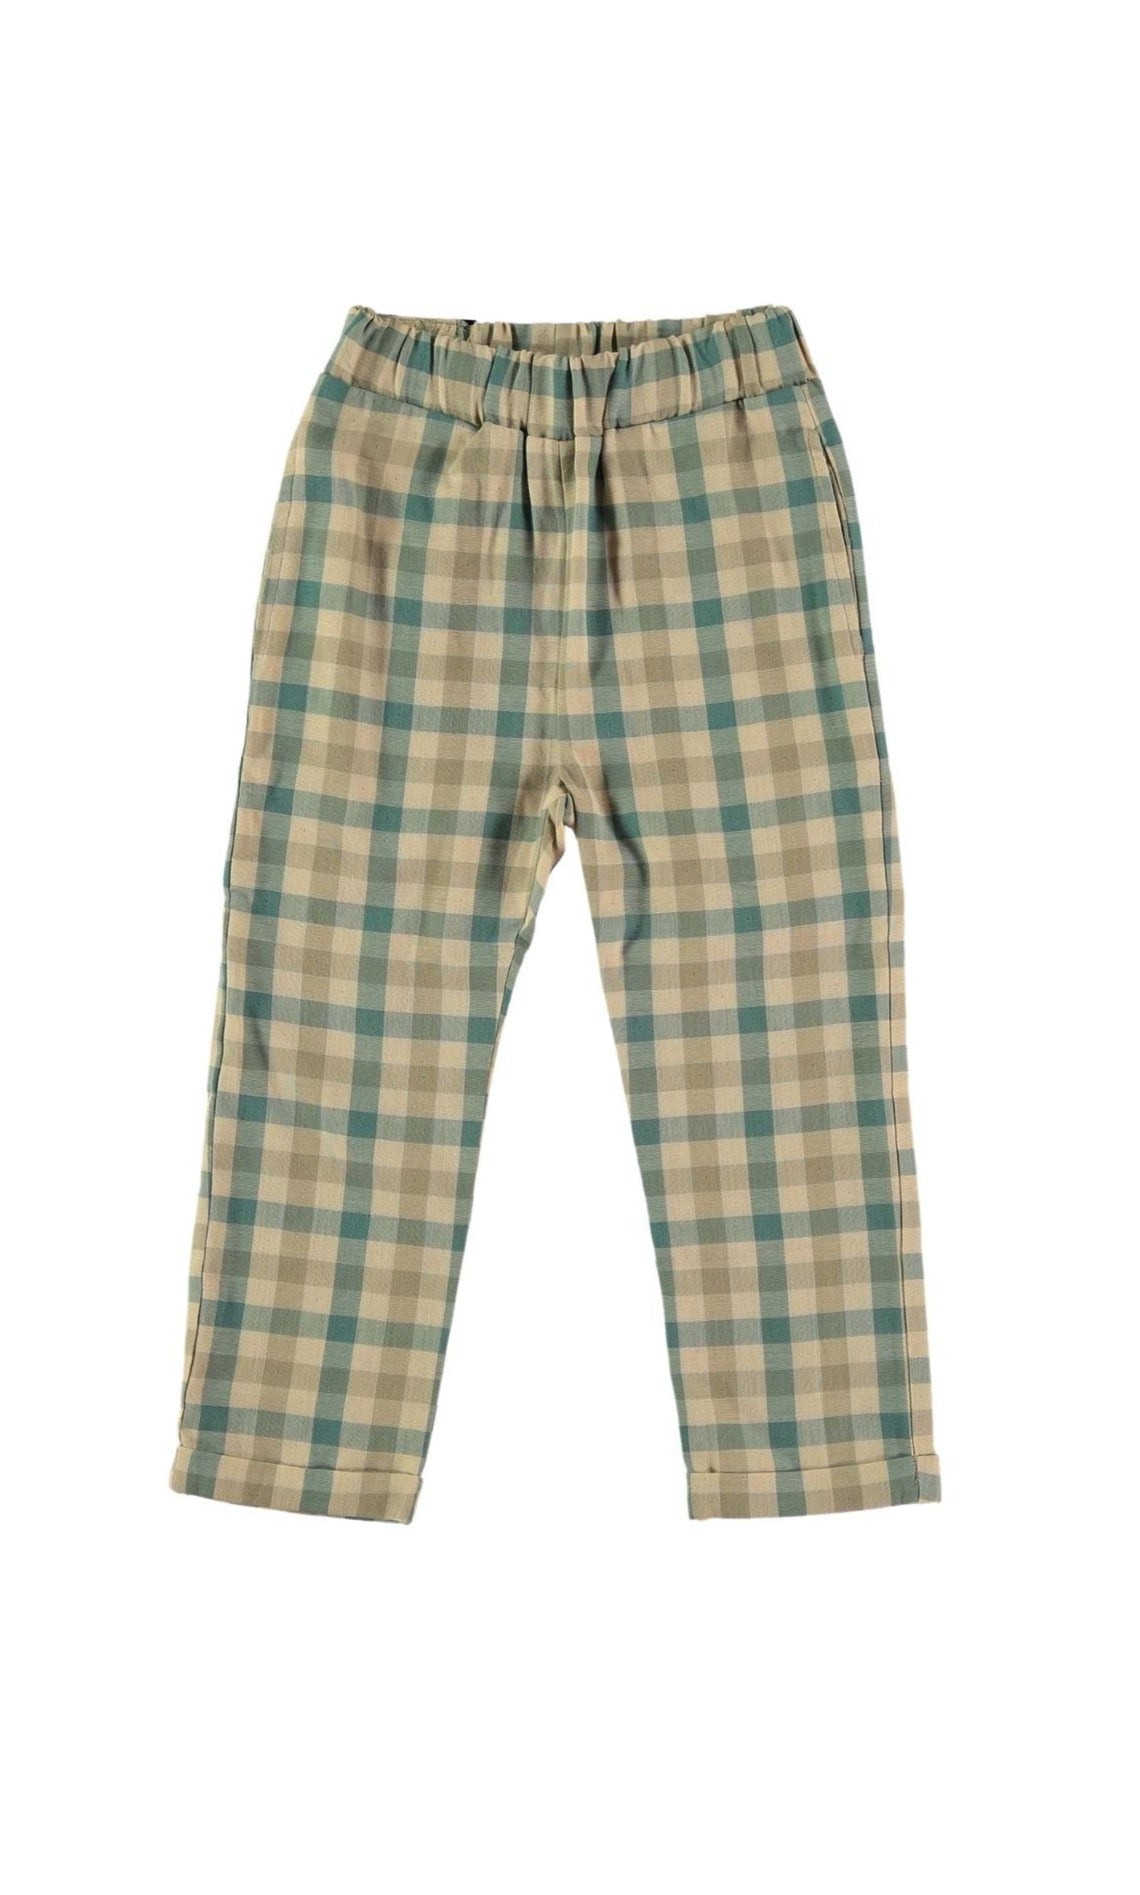 Moss agate woven trousers Trousers Coco au lait 